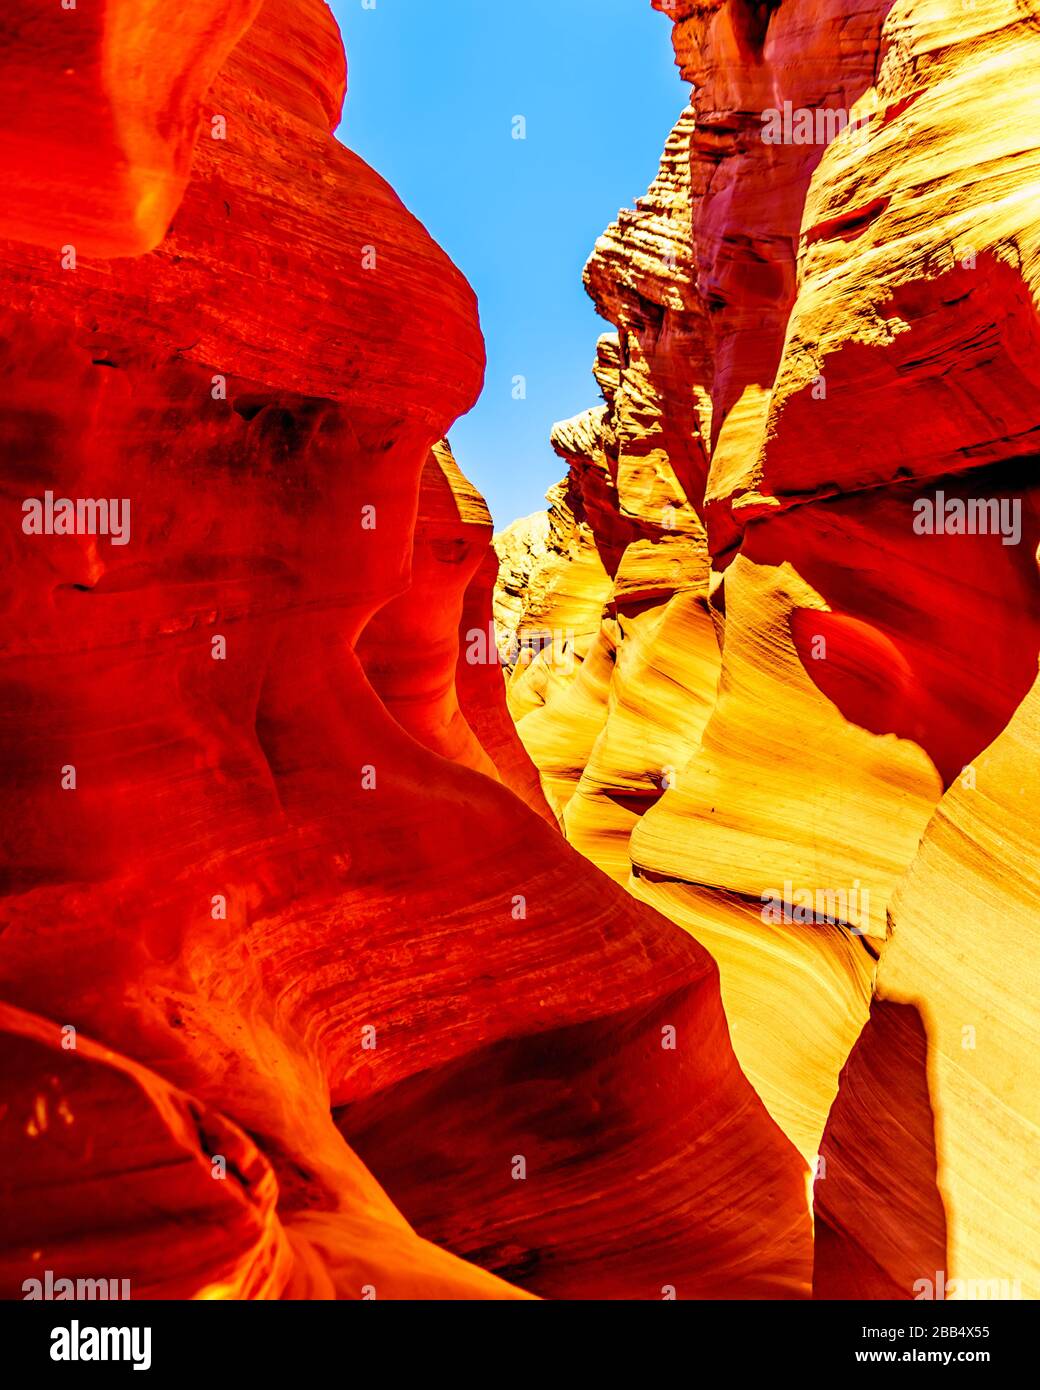 The smooth curved Red Navajo Sandstone walls of Rattlesnake Canyon, one of the famous Slot Canyons in the Navajo lands near Page Arizona, USA Stock Photo